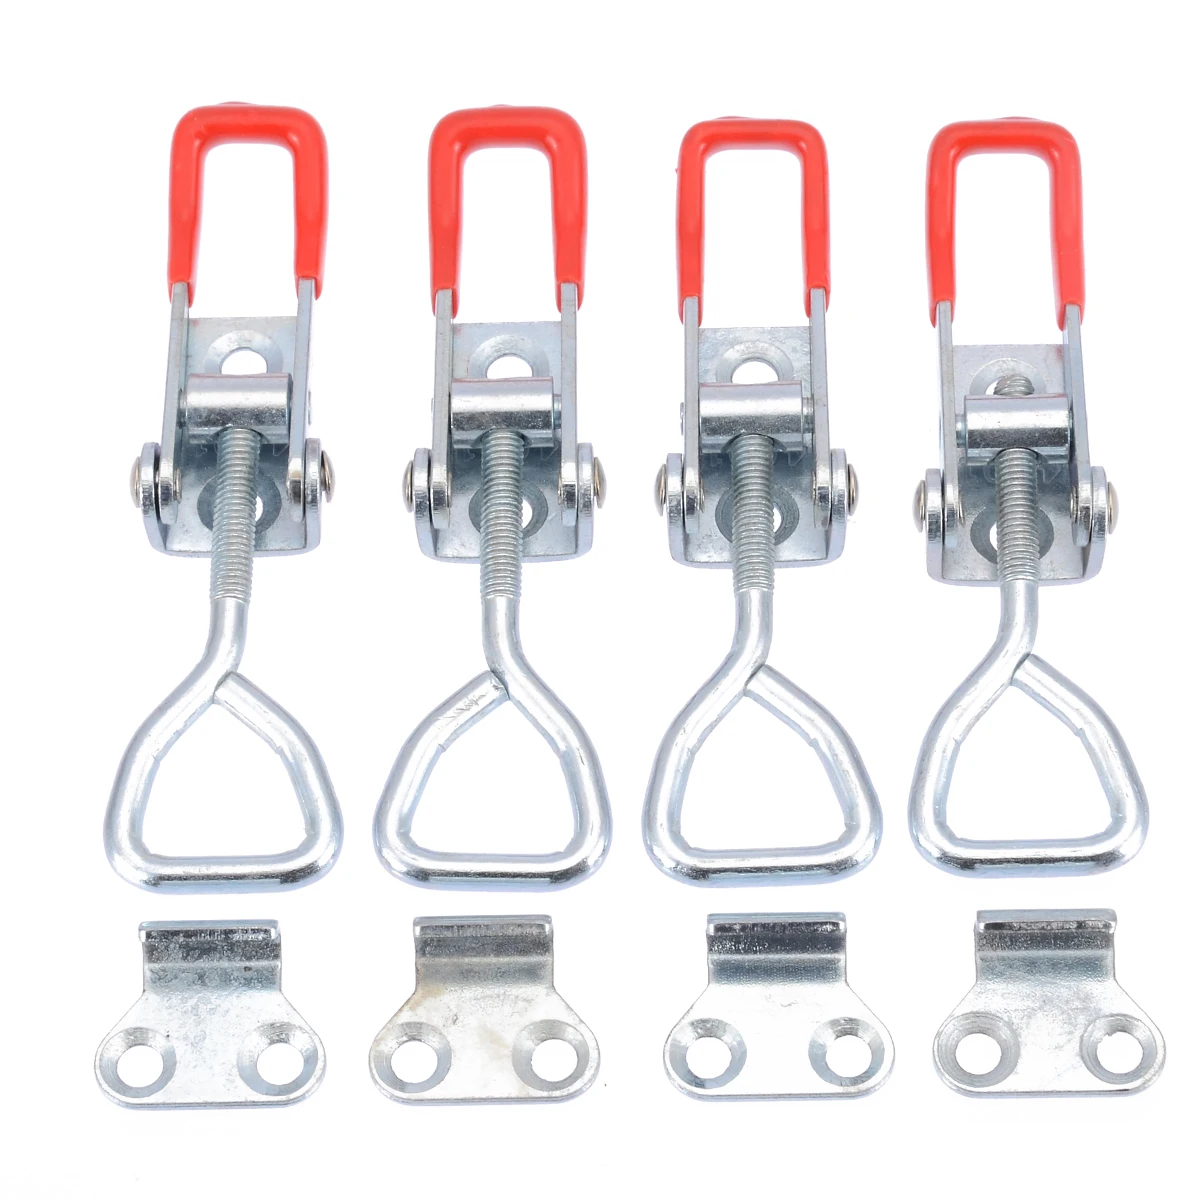 Tool Parts 4 Pcs Adjustable Lock Spring Loaded Toggle Box Trunk Latch Catches Hasps Clamp 